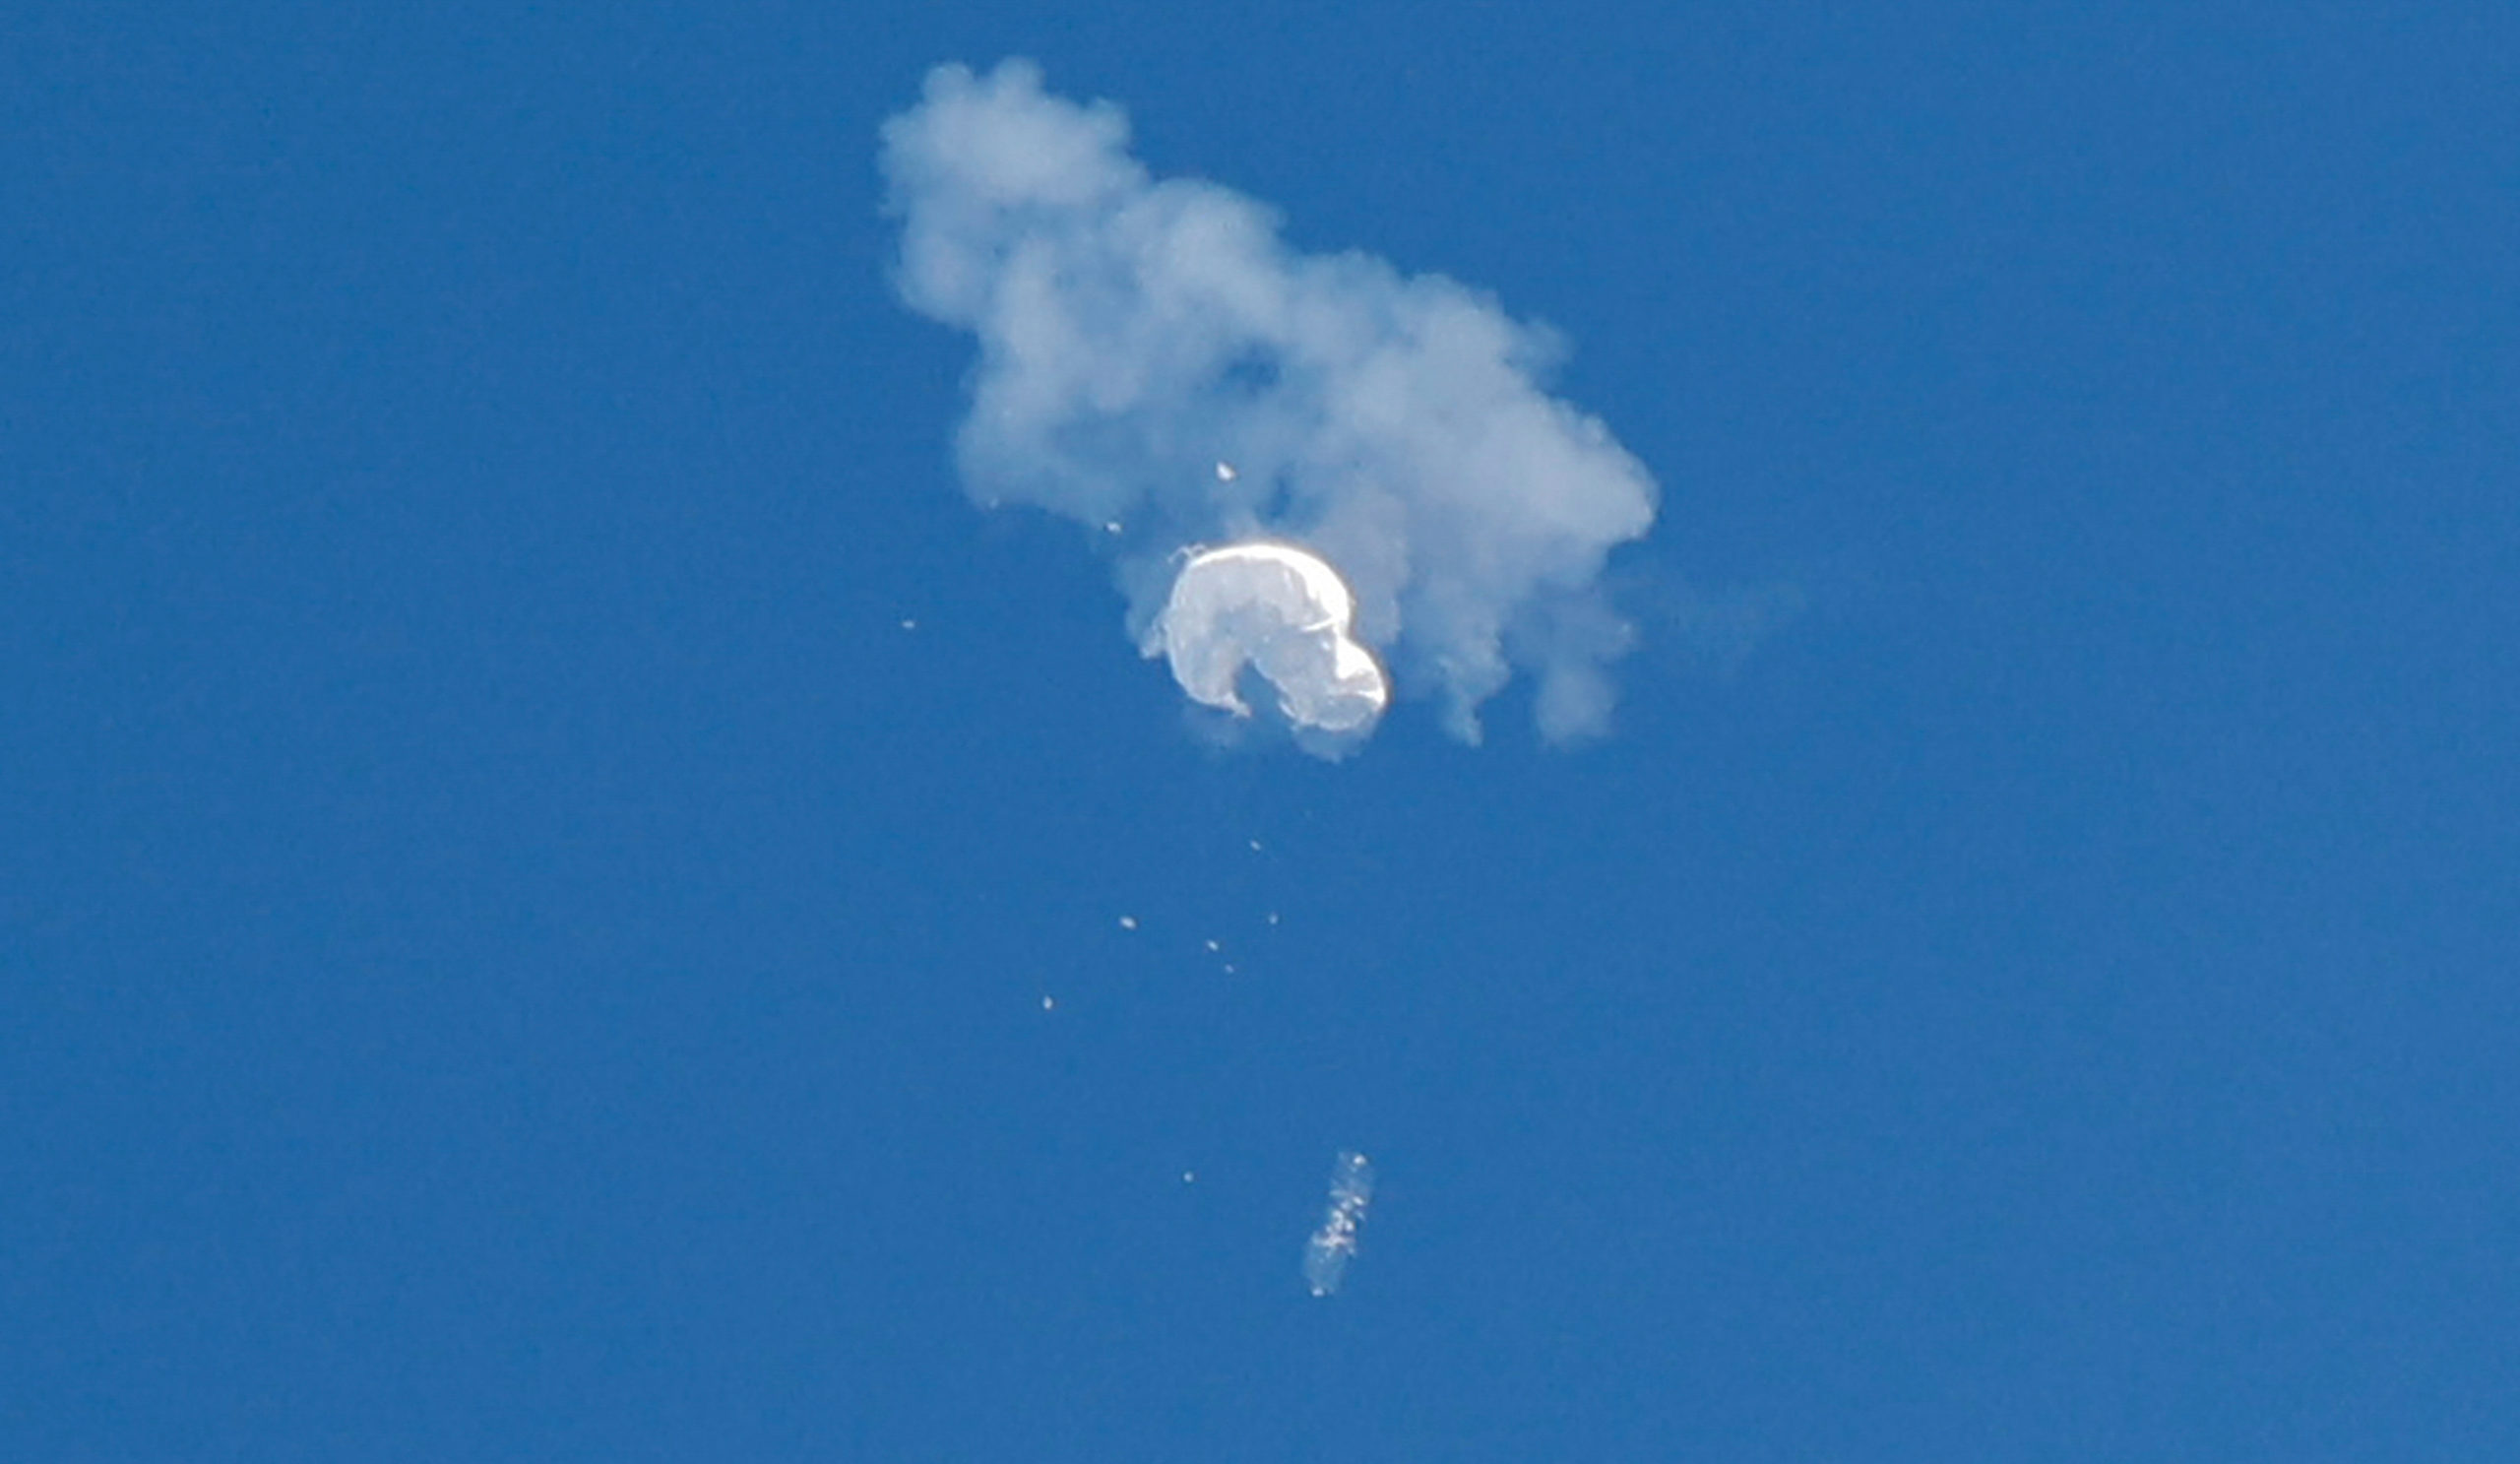 The suspected Chinese spy balloon drifts to the ocean after being shot down off the coast in Surfside Beach, South Carolina, U.S. February 4, 2023. REUTERS/Randall Hill china shoot down